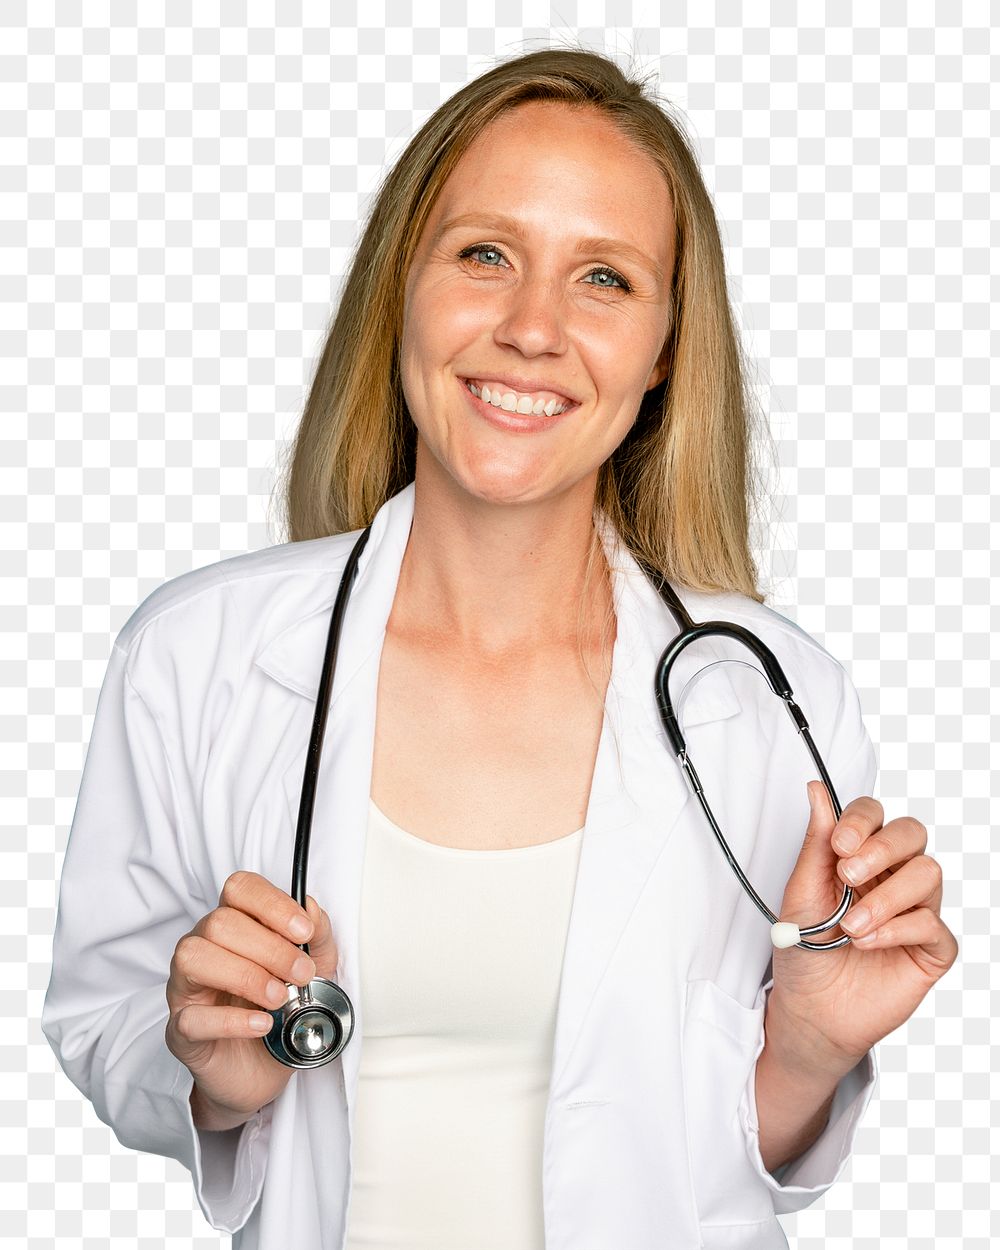 Cheerful woman doctor mockup png using stethoscope